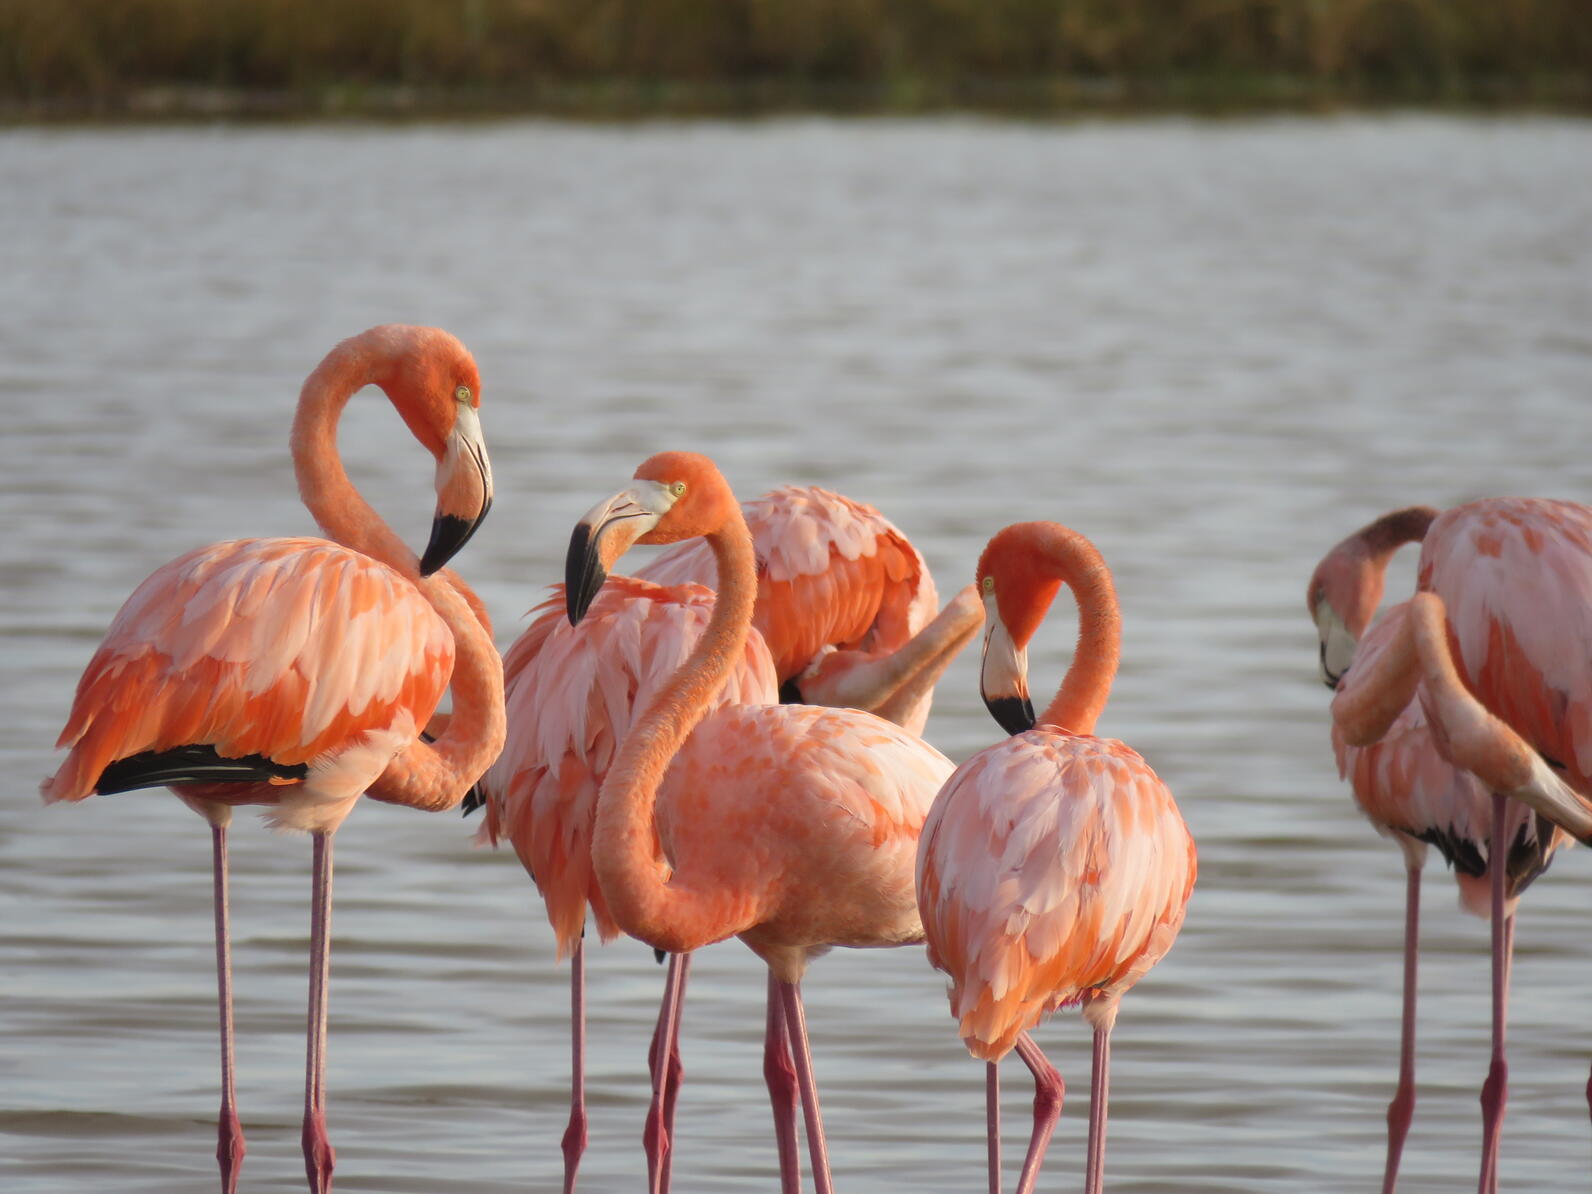 American Flamingos stand in water together.